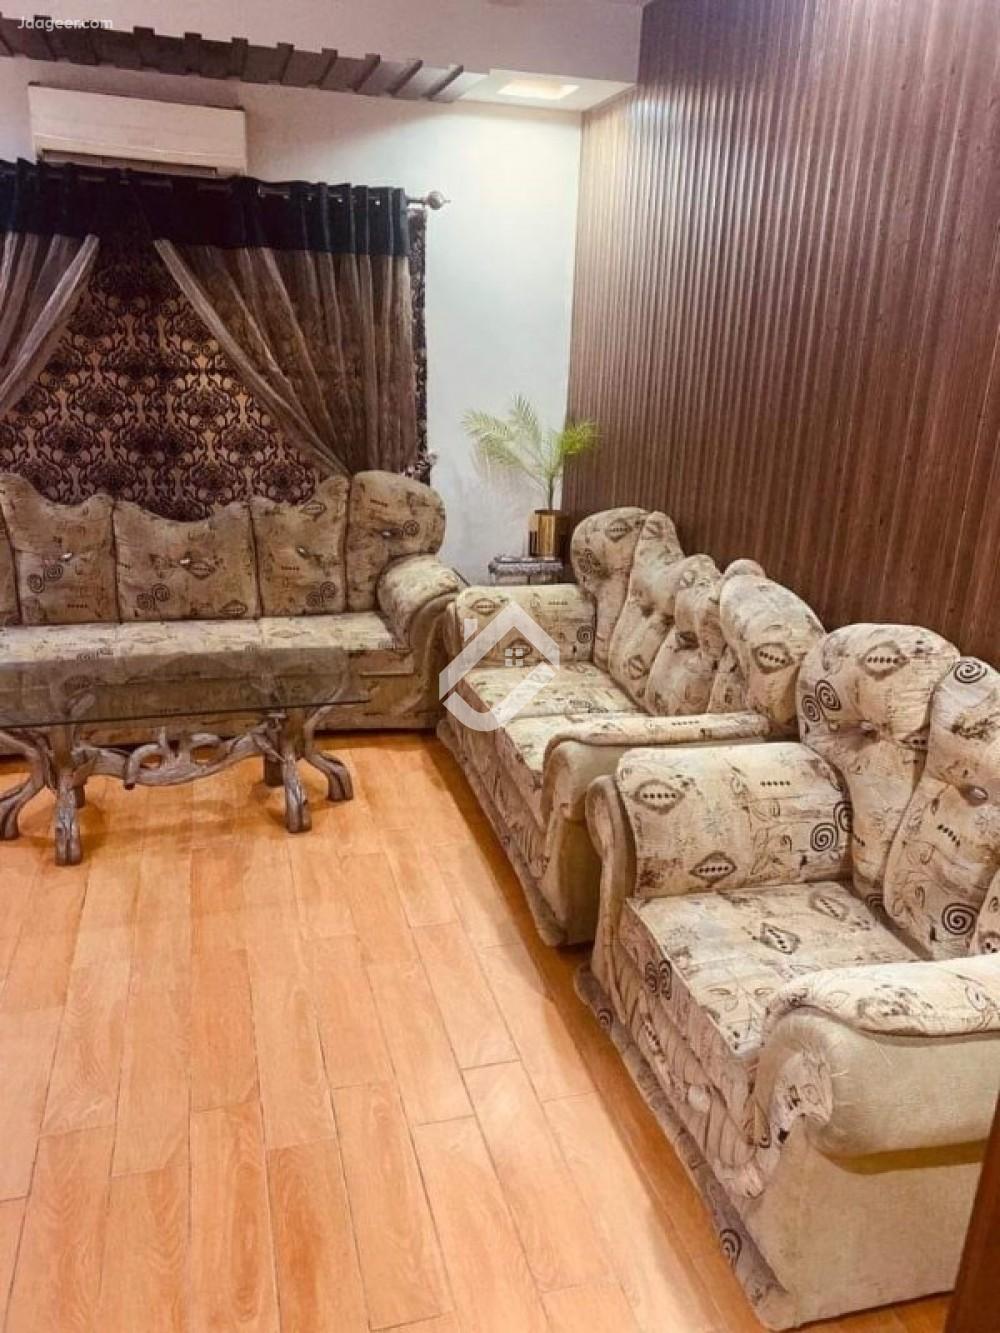 Main image 10 Marla Five Stories Furnished Hostel For Sale In Johar Town Near UMT  UMT(University of Management and Technology)